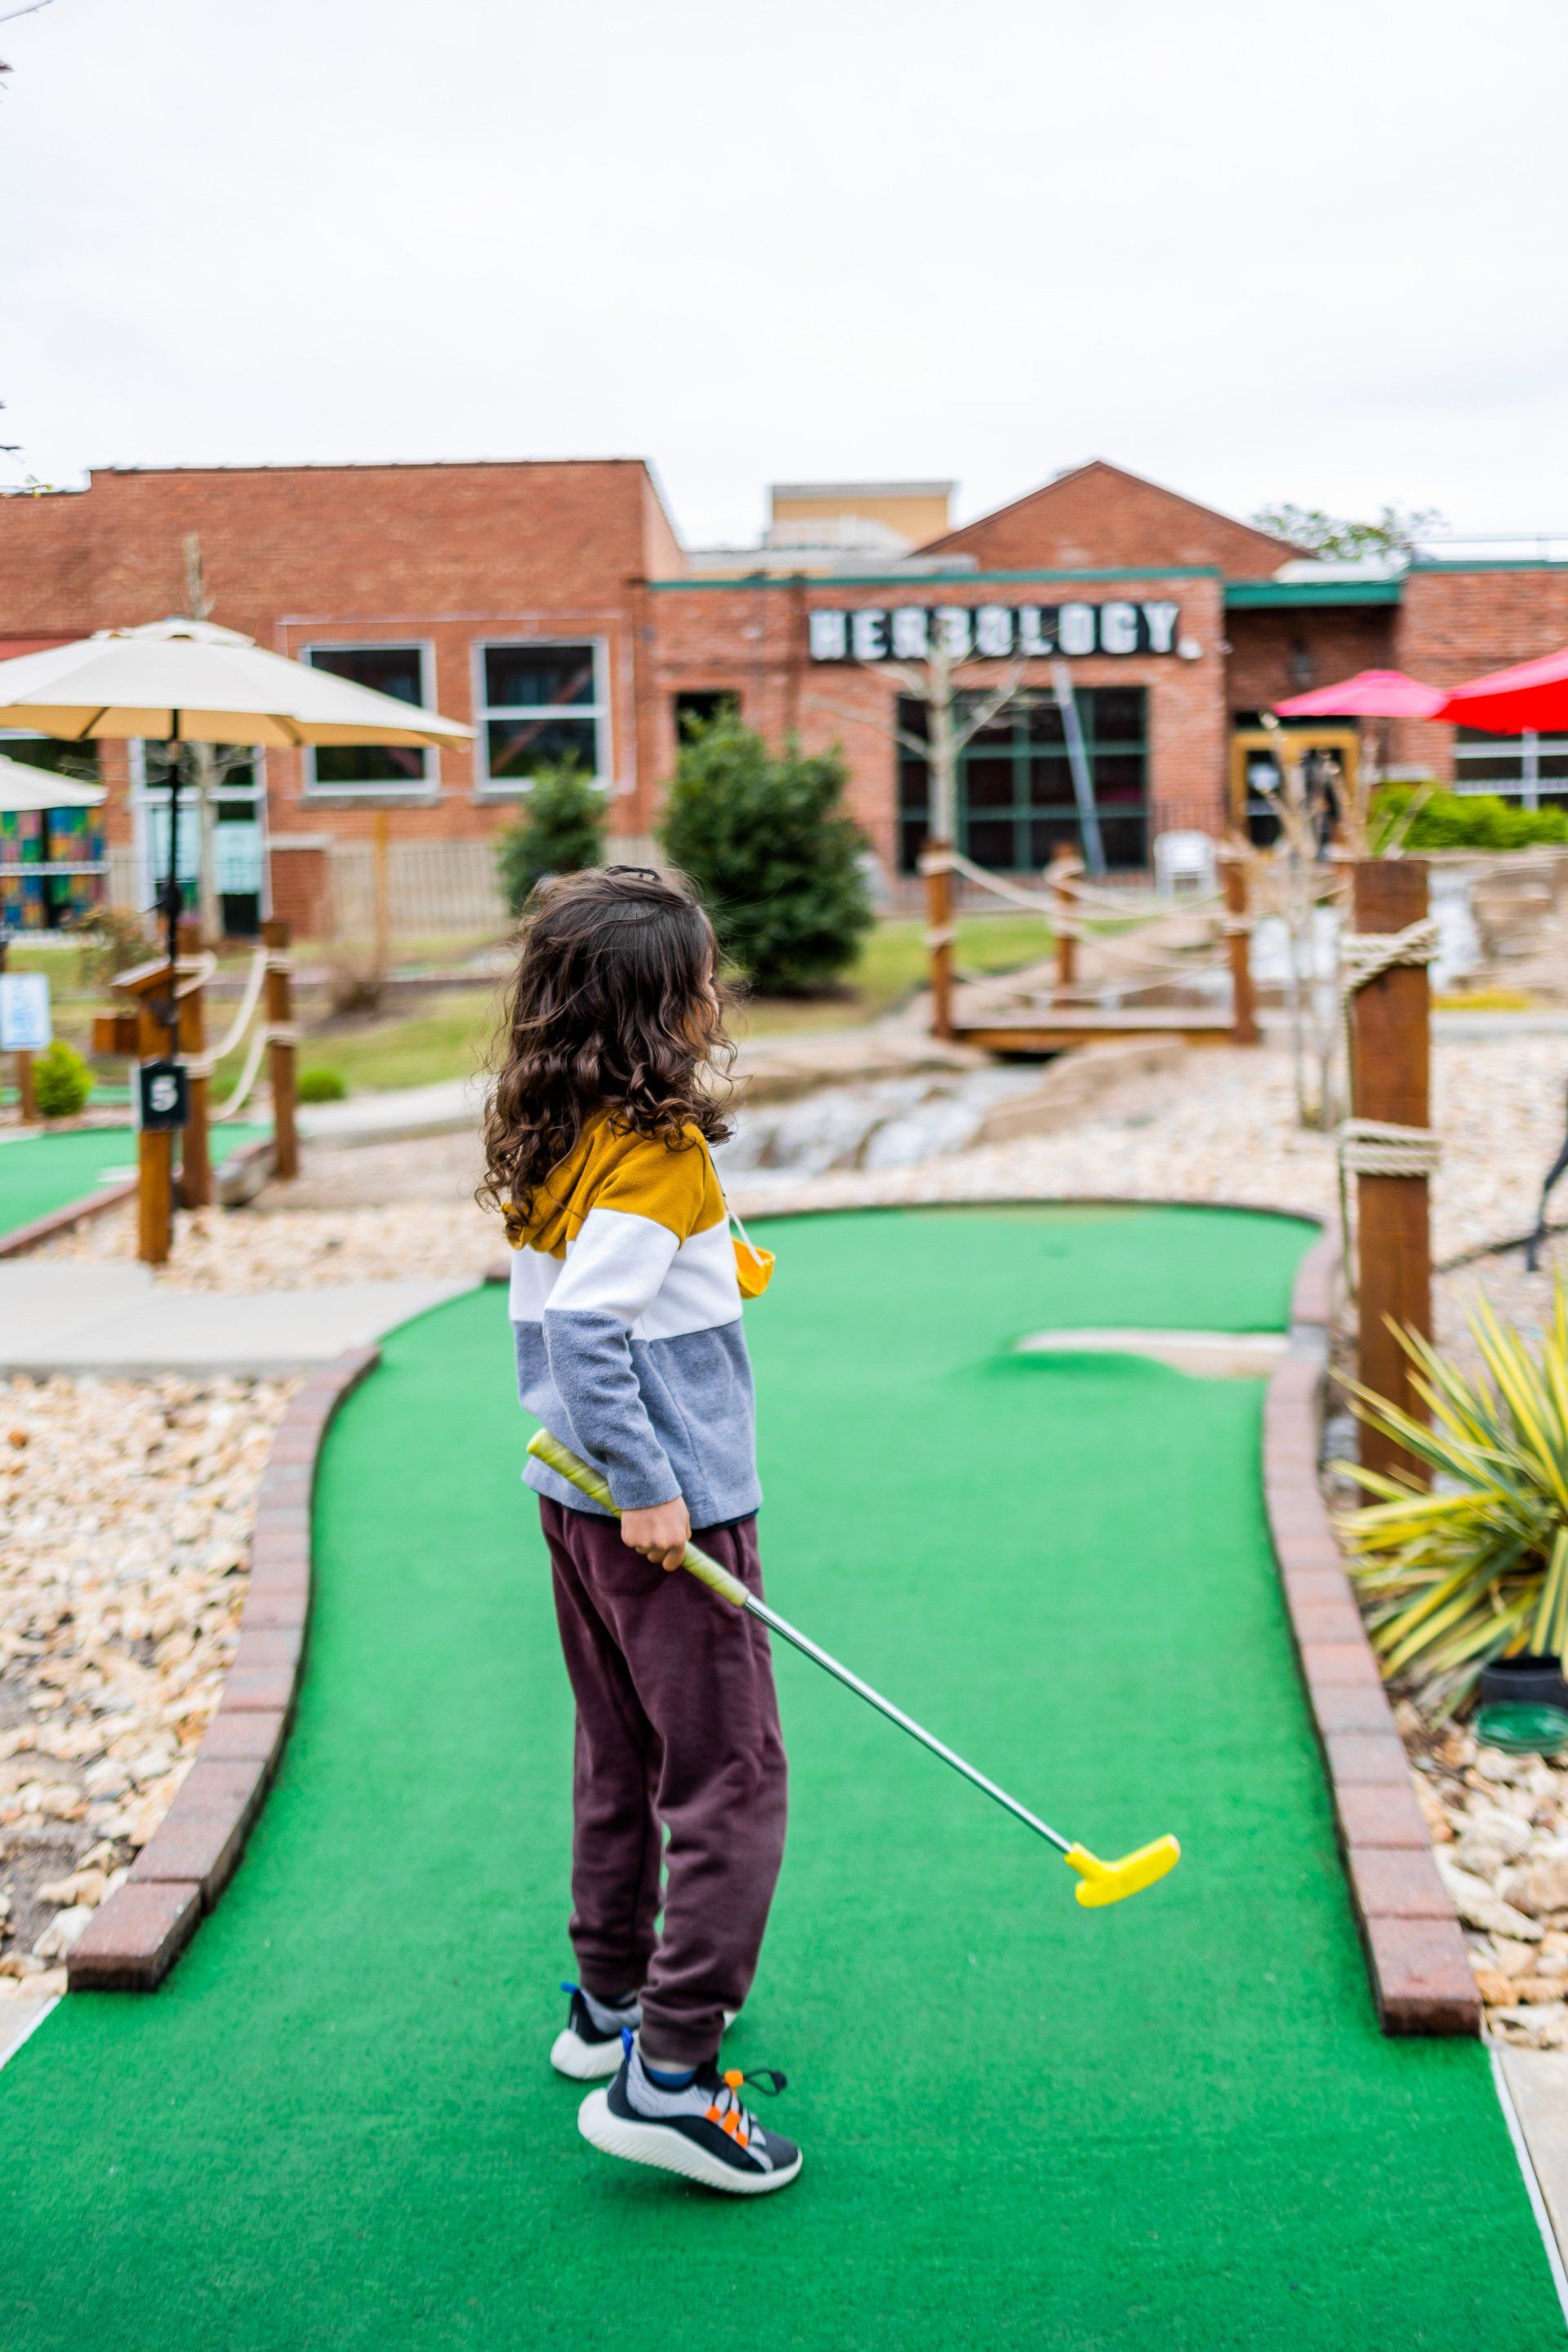 A young girl is playing mini golf on a green course.